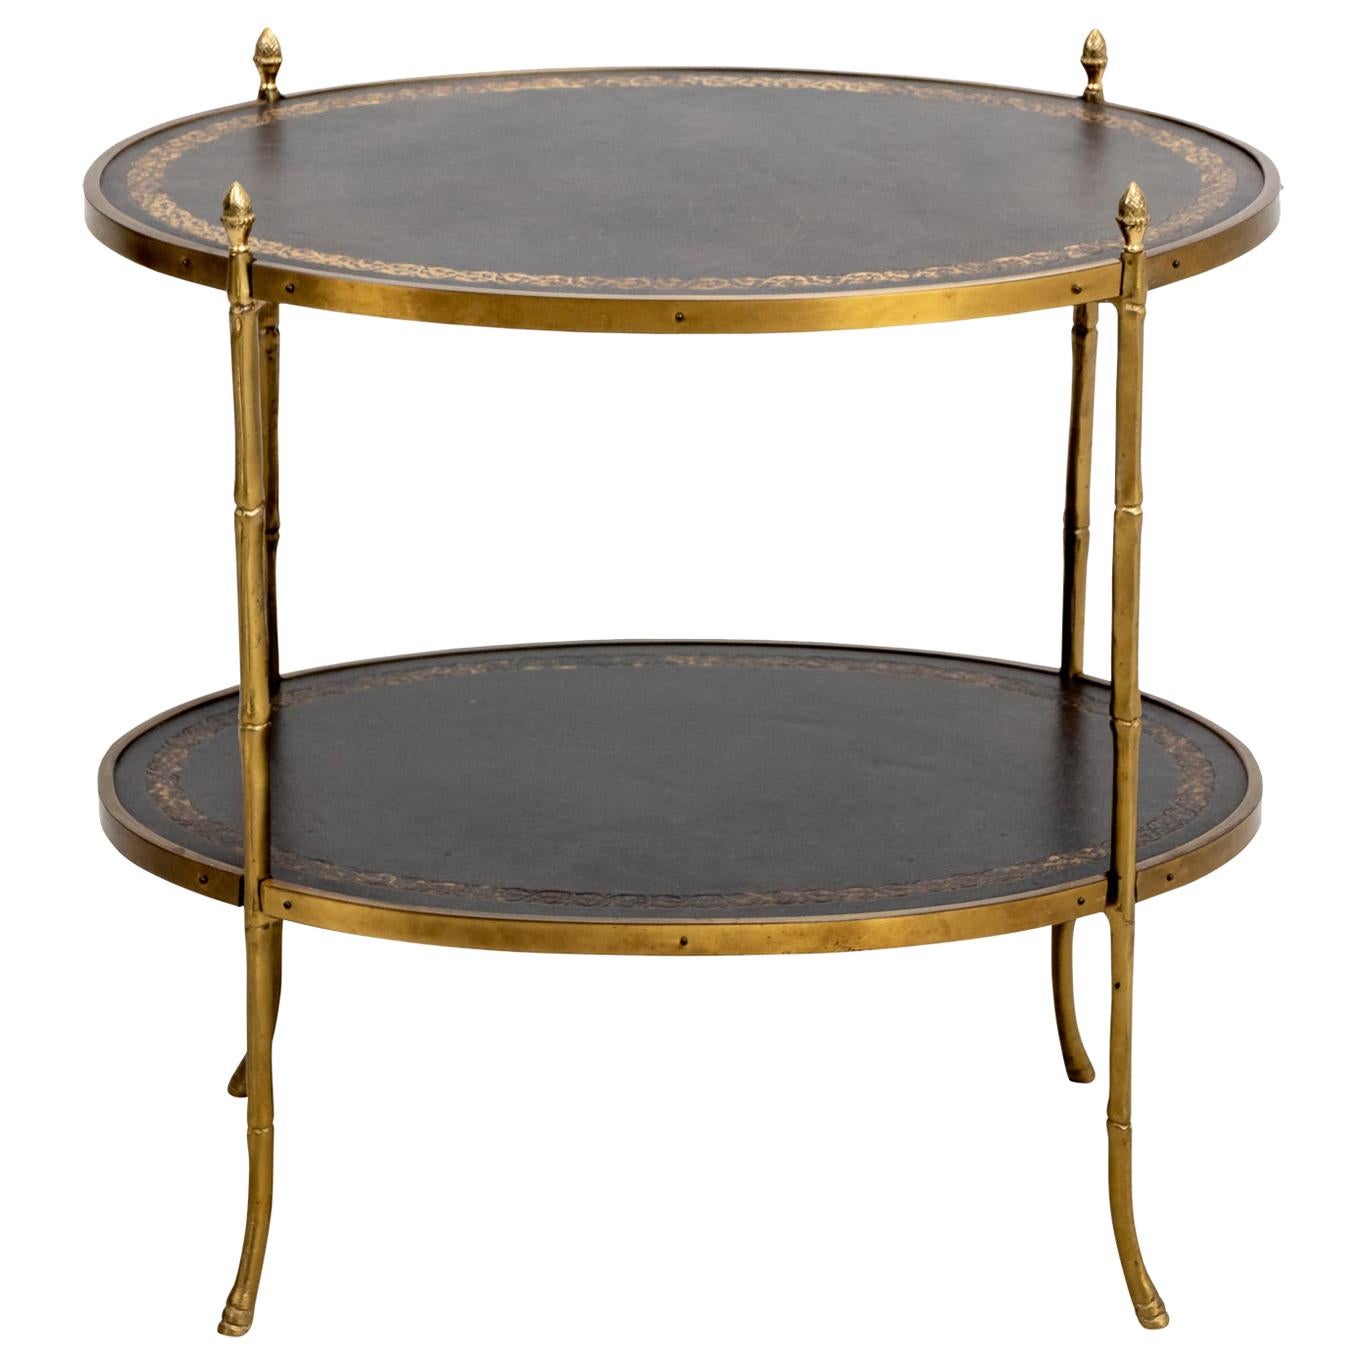 English Regency Style Cocktail Table